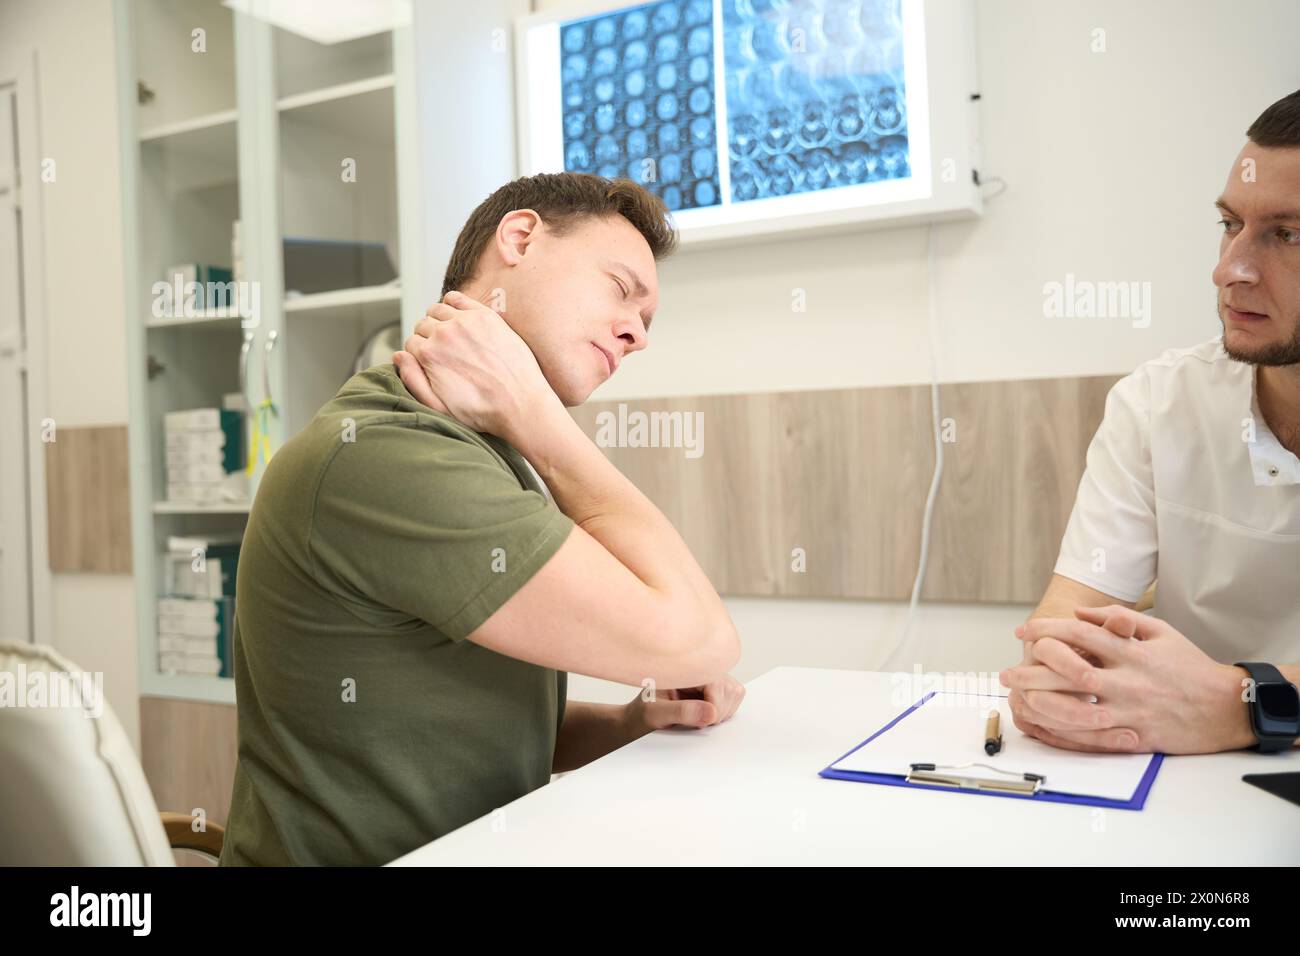 Man complaining of cervicalgia to medical professional Stock Photo